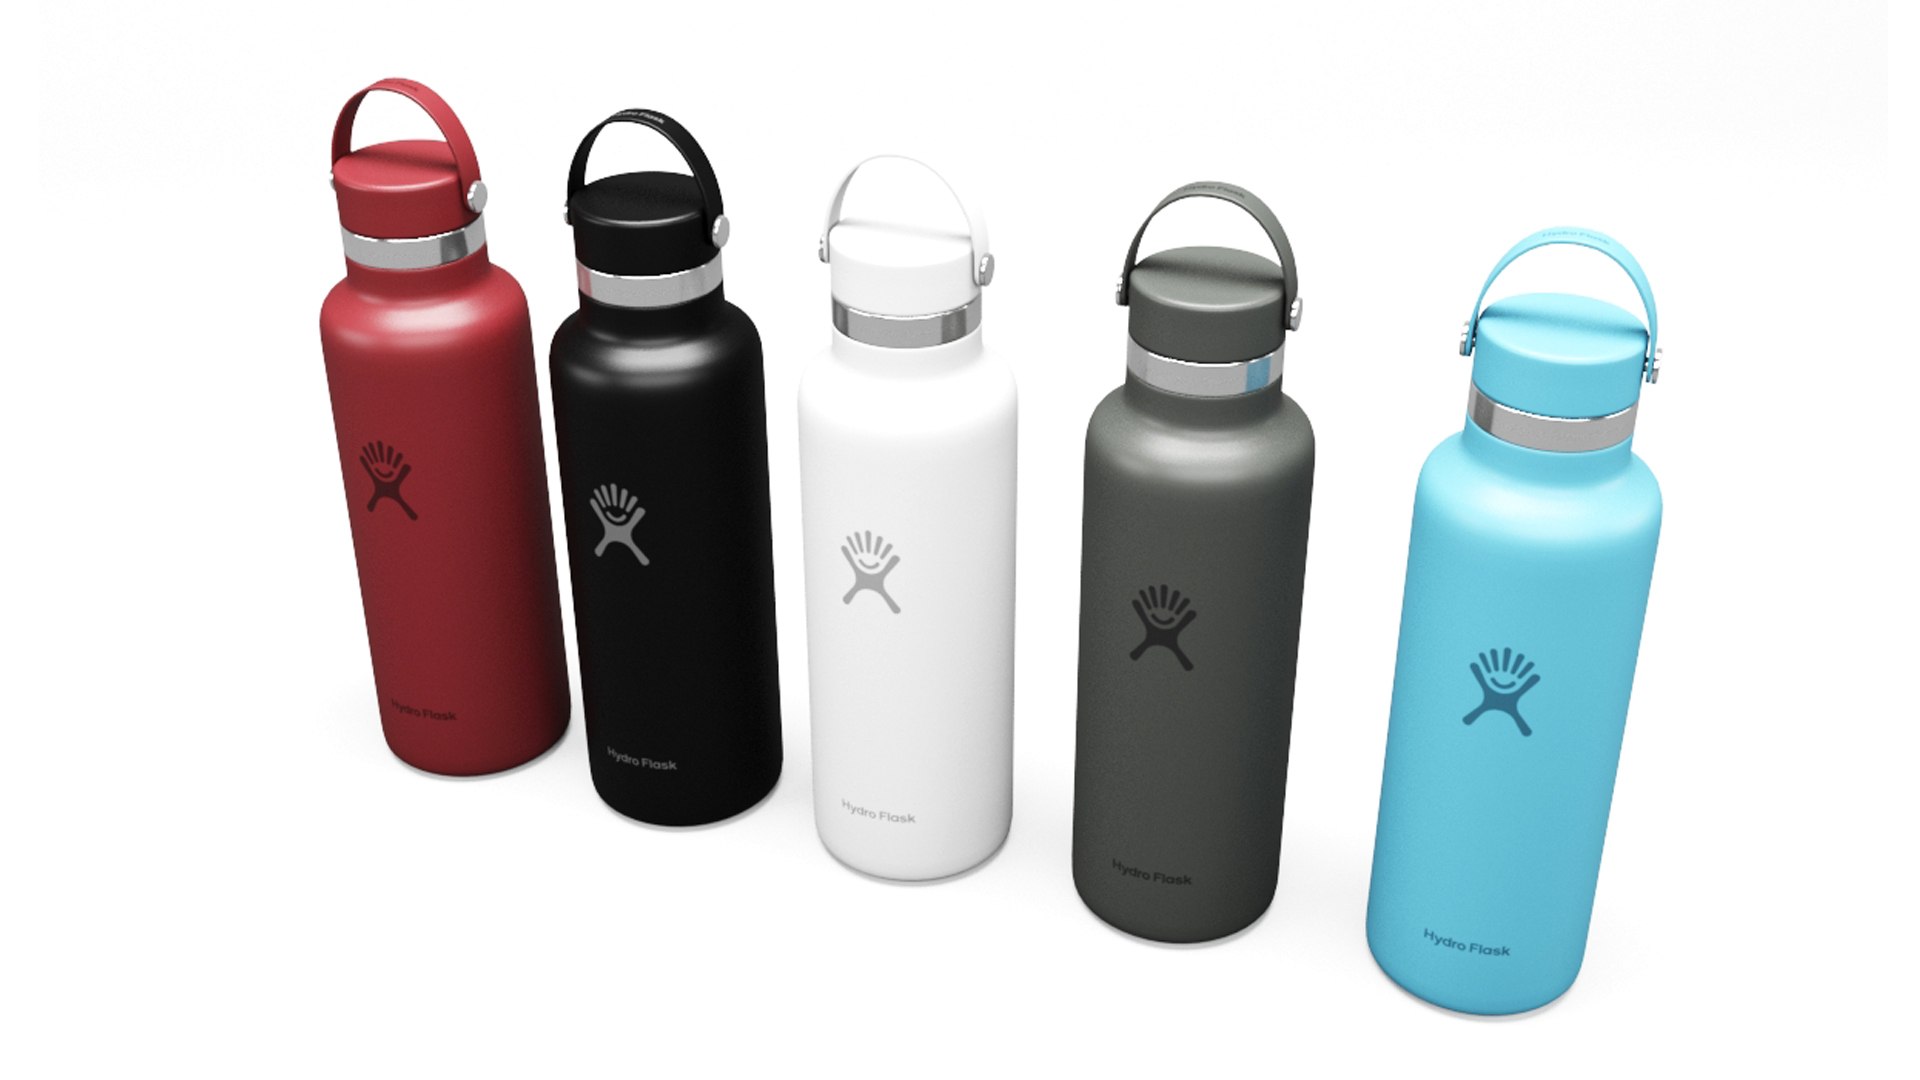 Hydro Flask 16 oz Stackable